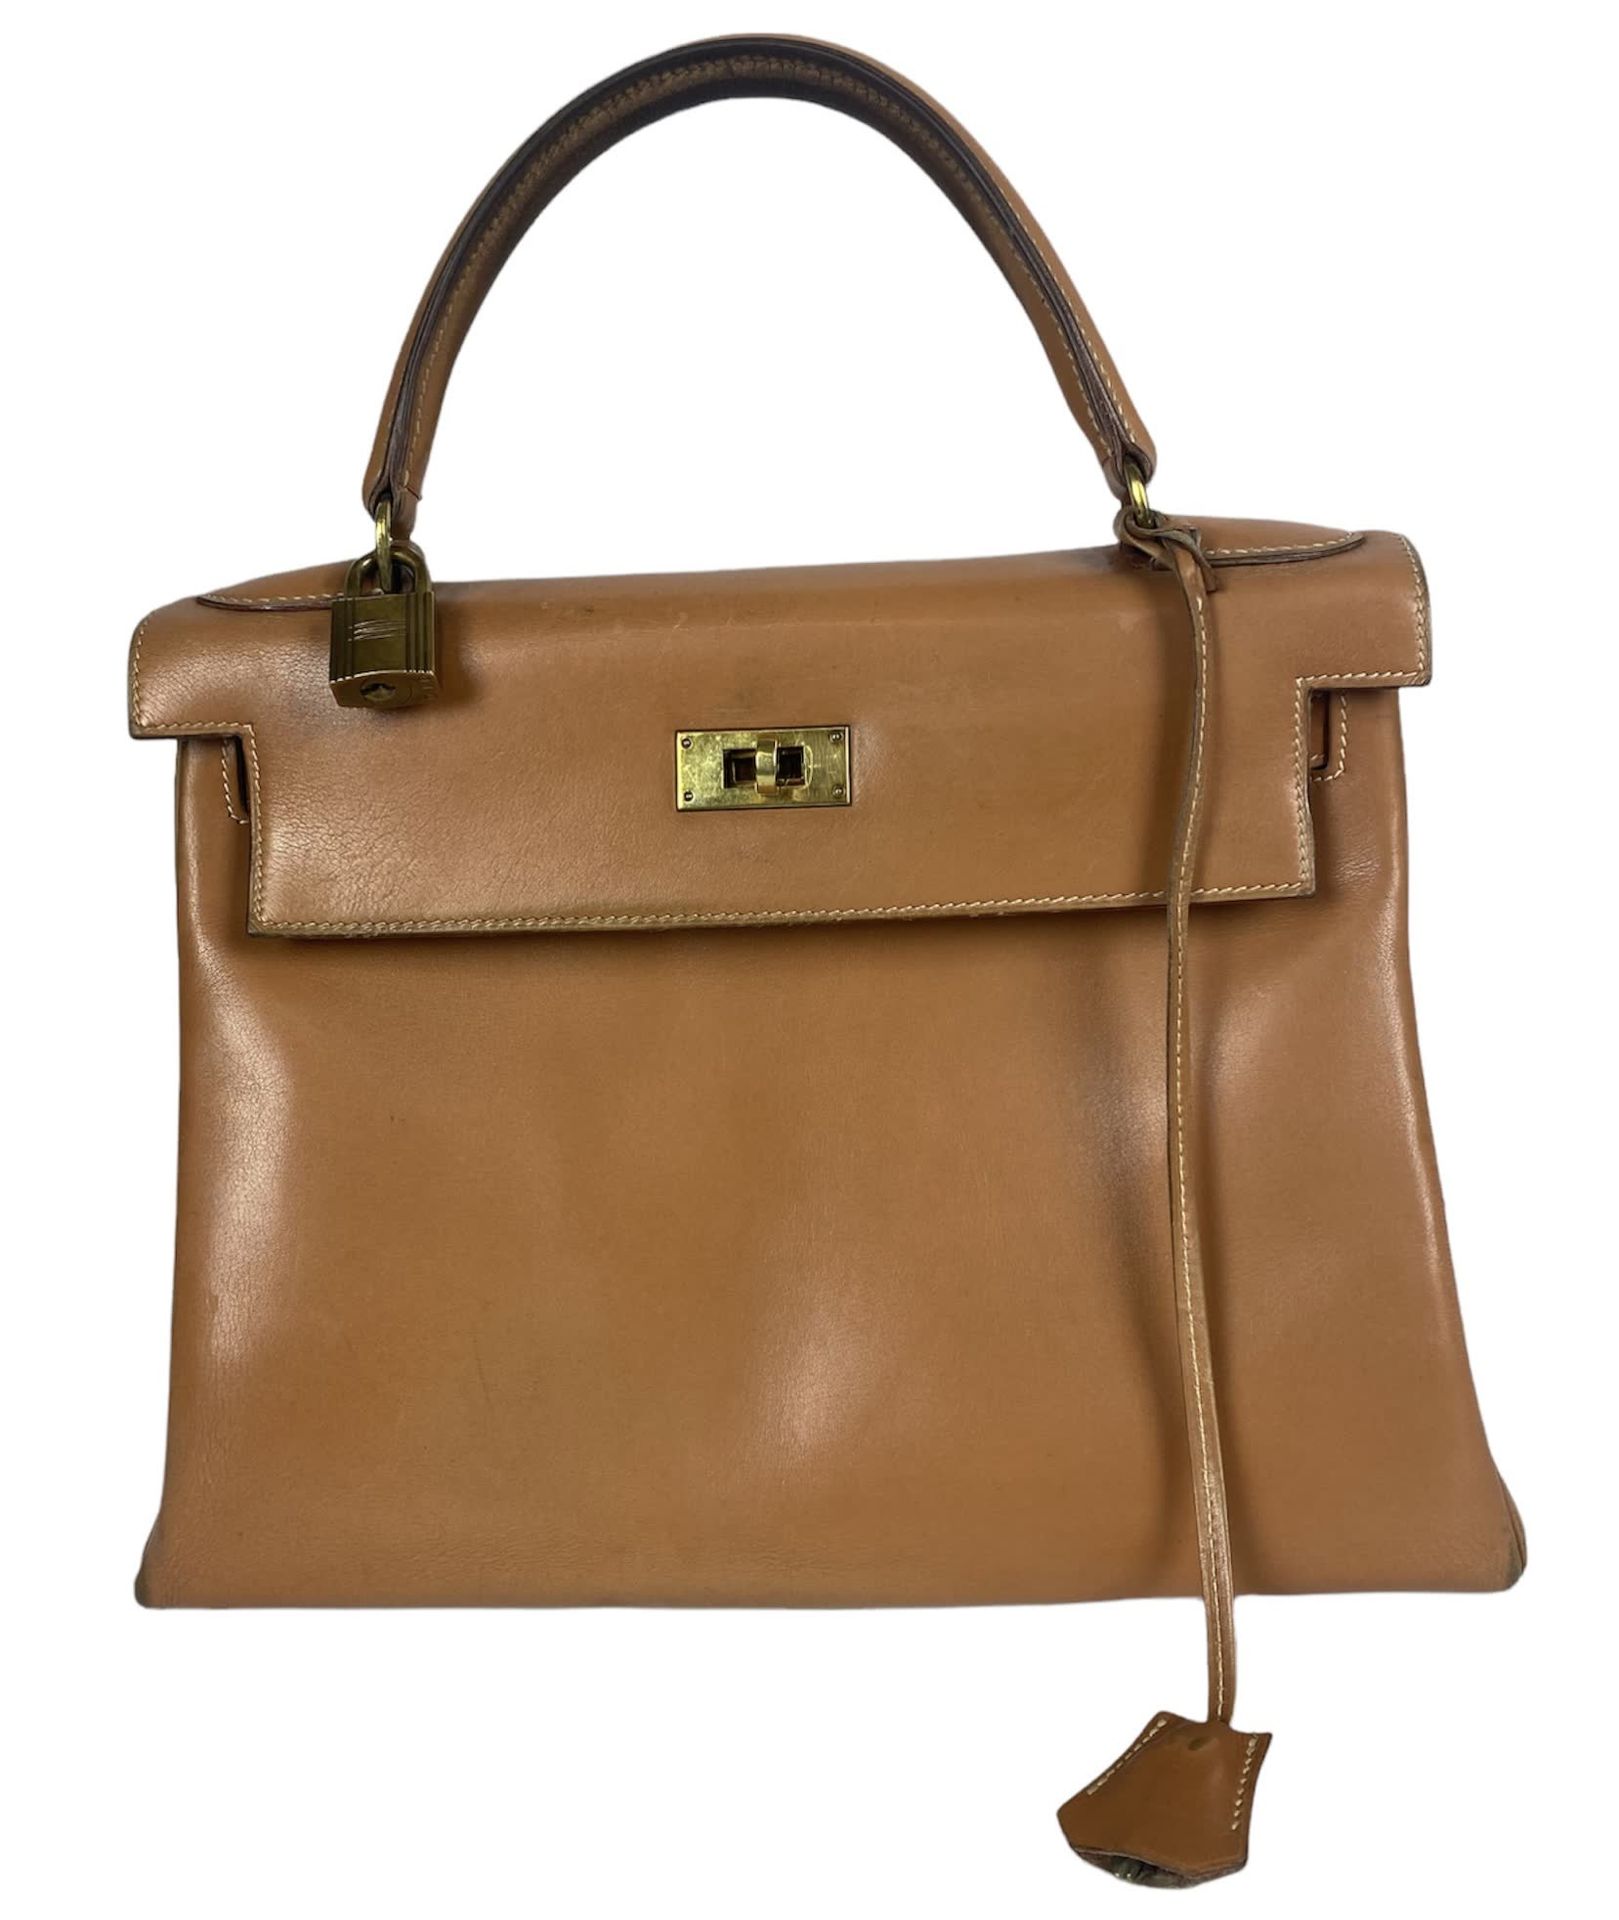 Null HERMES PARIS Kelly bag 28 cm in camel box with gold metal hardware. Wear to&hellip;